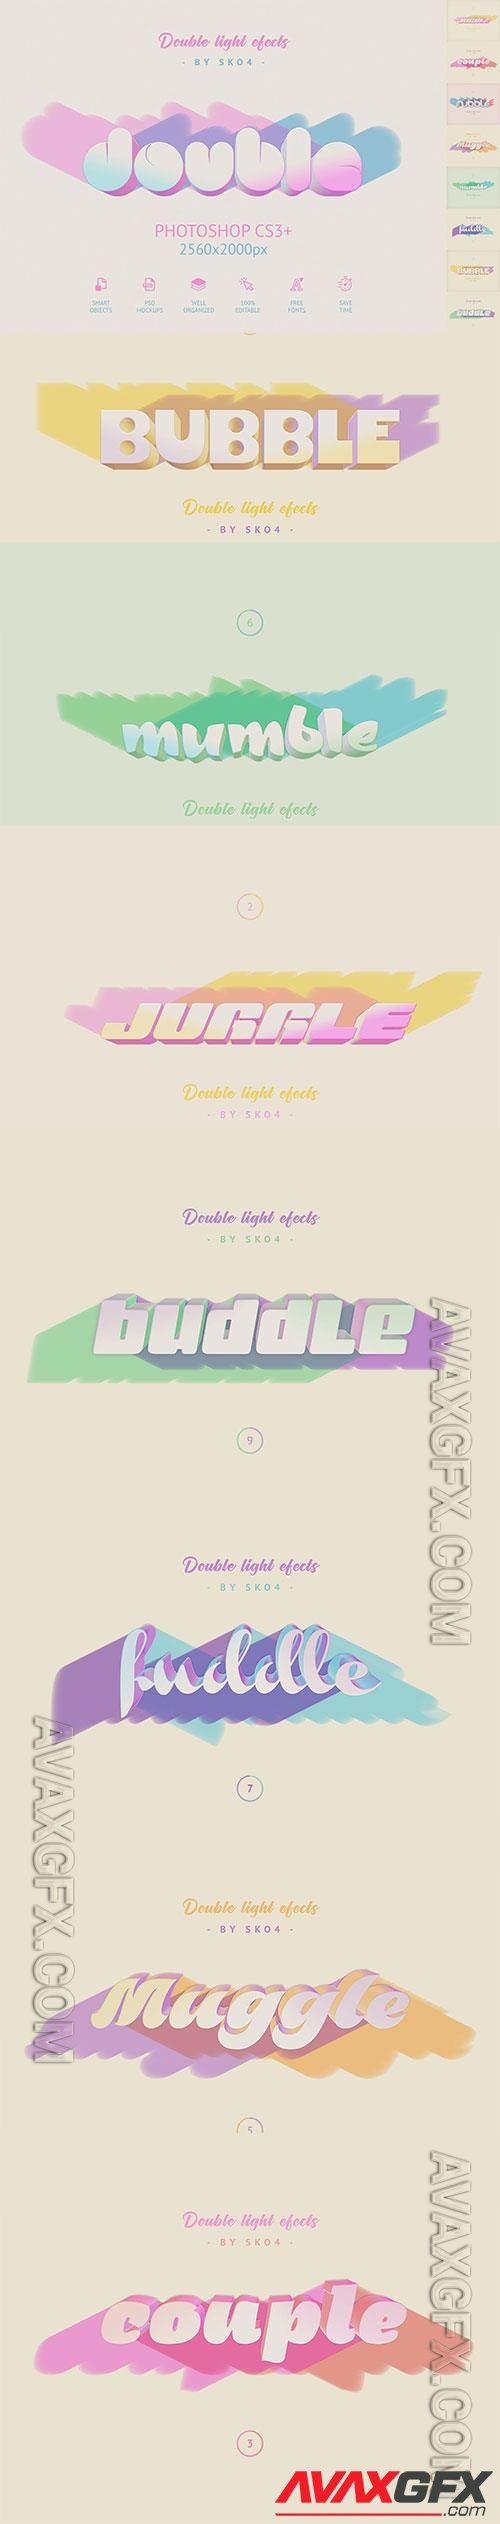 Double Light Text Effects Psd